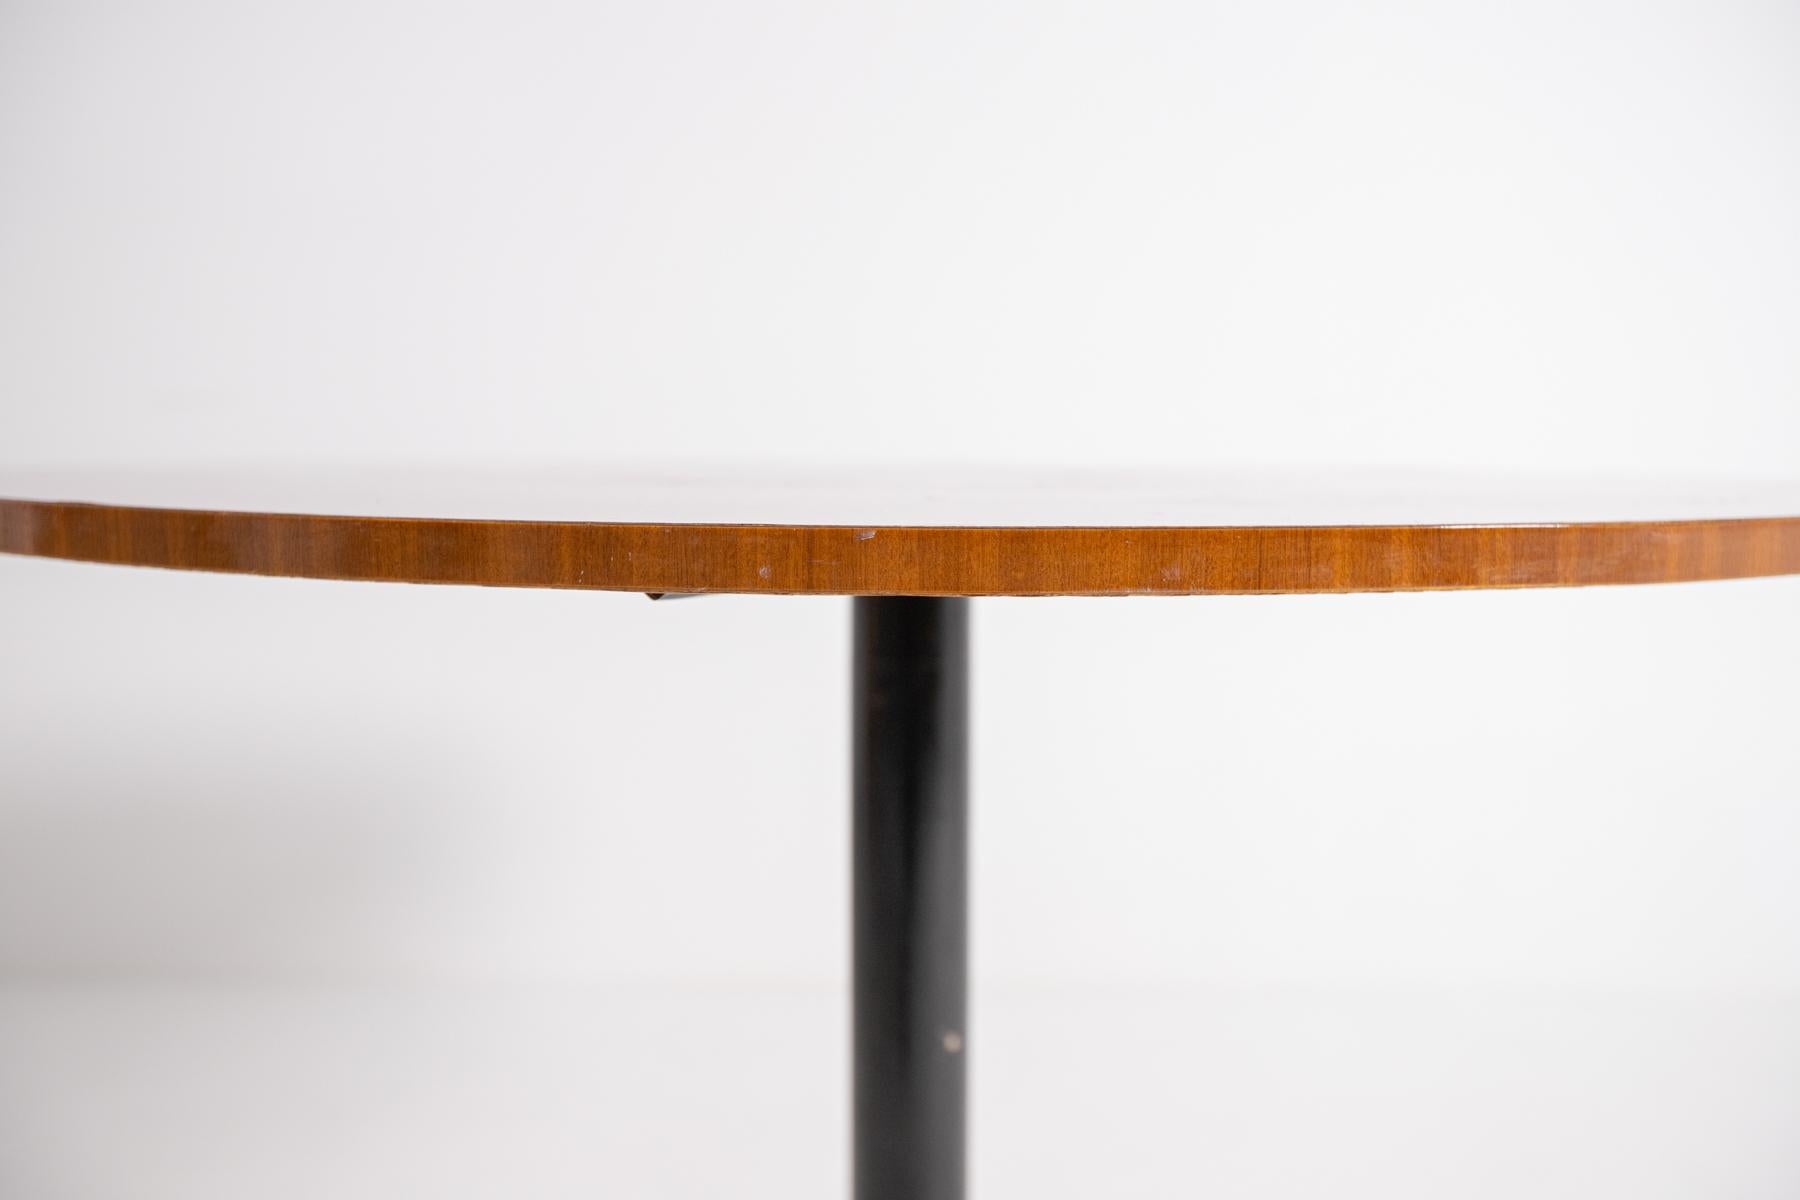 Italian modernist round table from the 1950s.
The table features a round top totally made of wood. Its structure is made of black painted iron. The table is supported by a single iron pedestal and at the base its four legs radiate around its entire